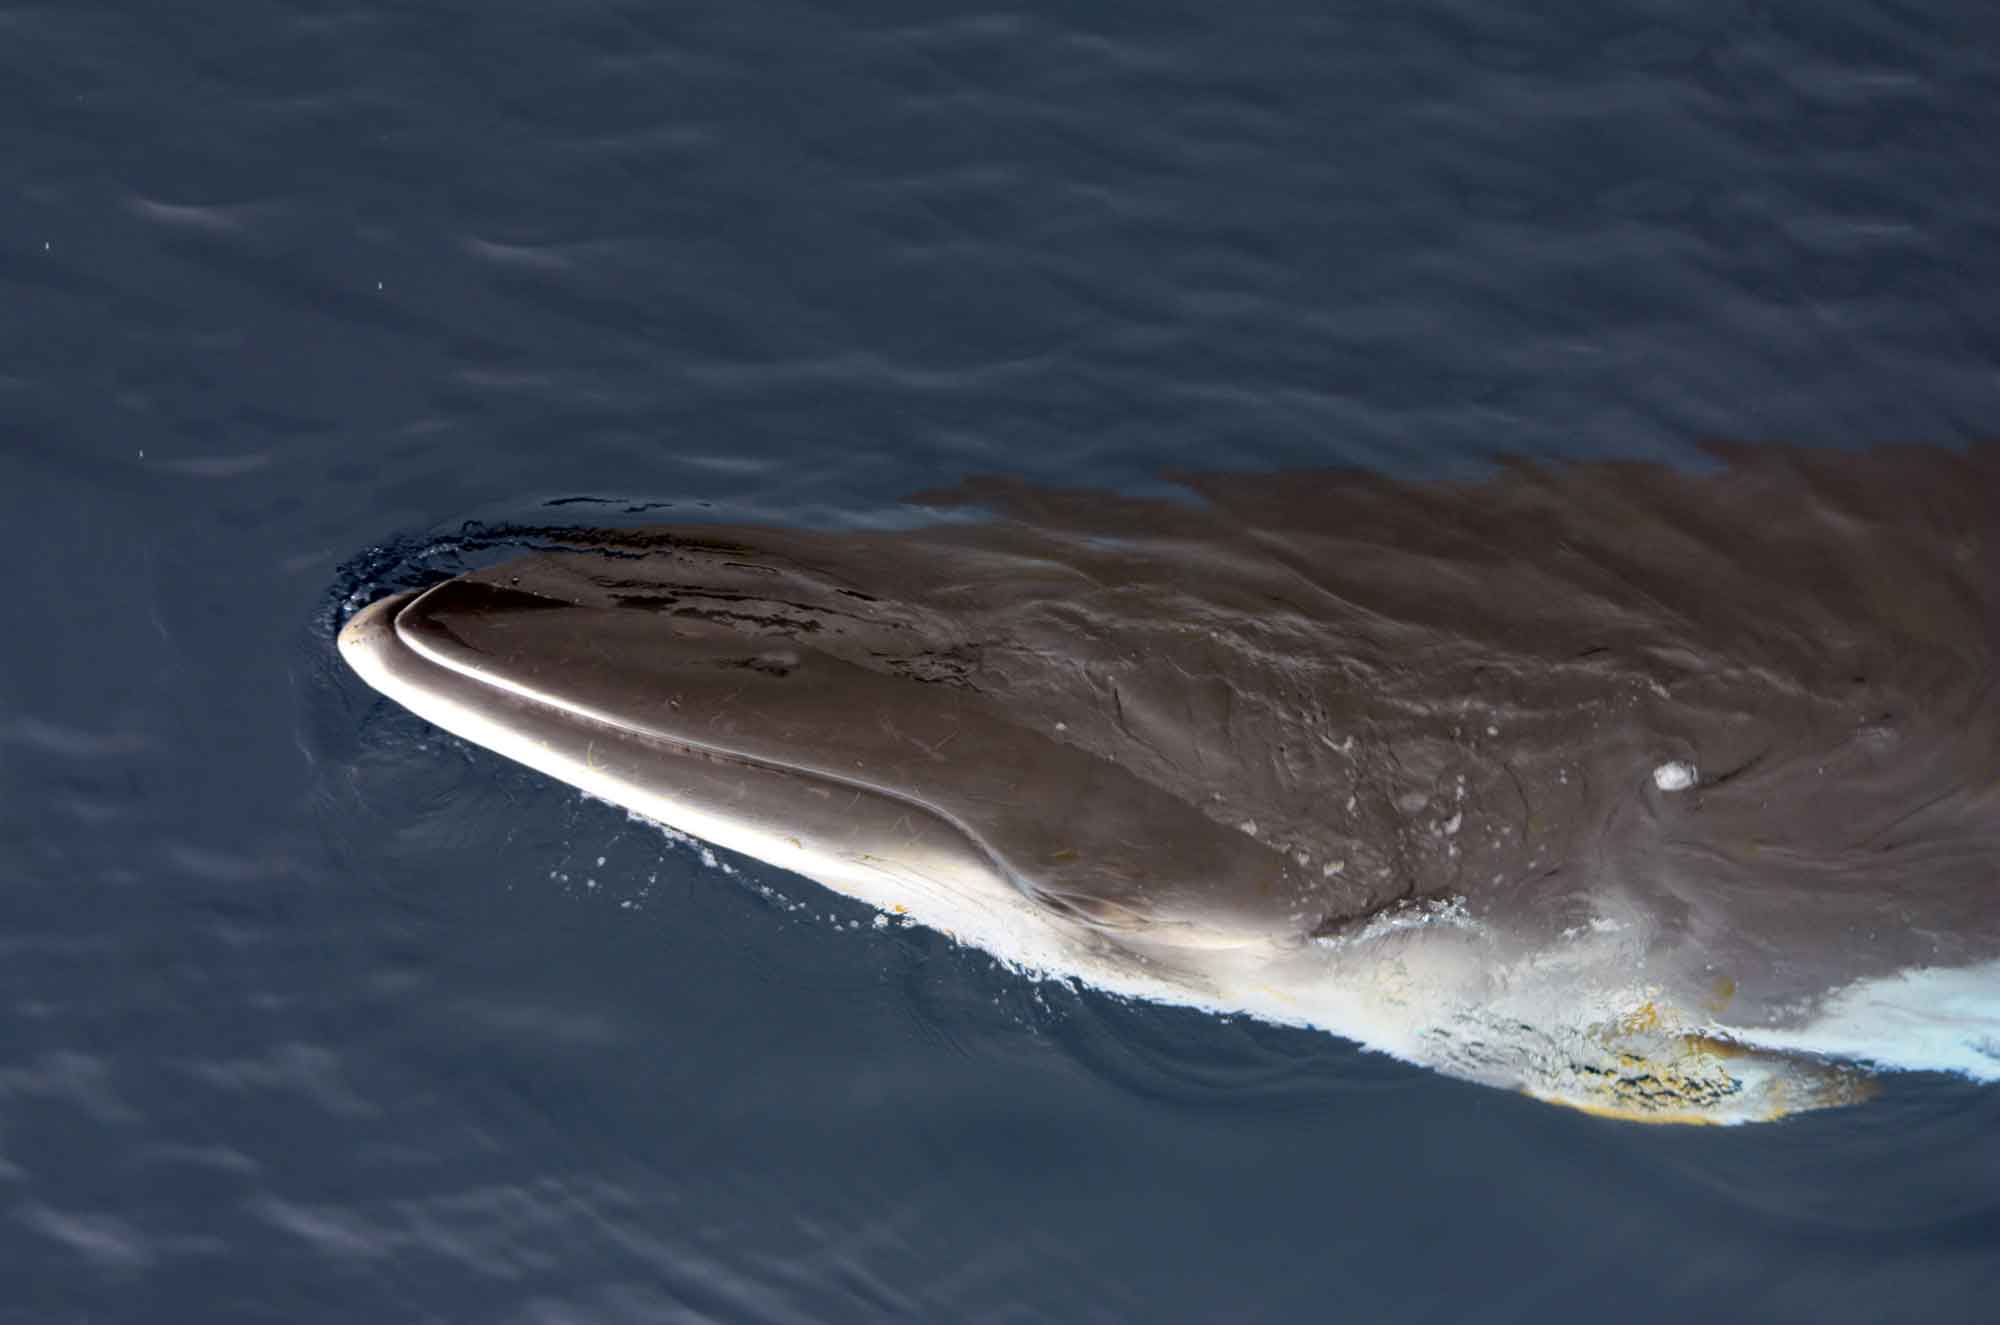 Minke whales are a resident cetacean species in San Diego.